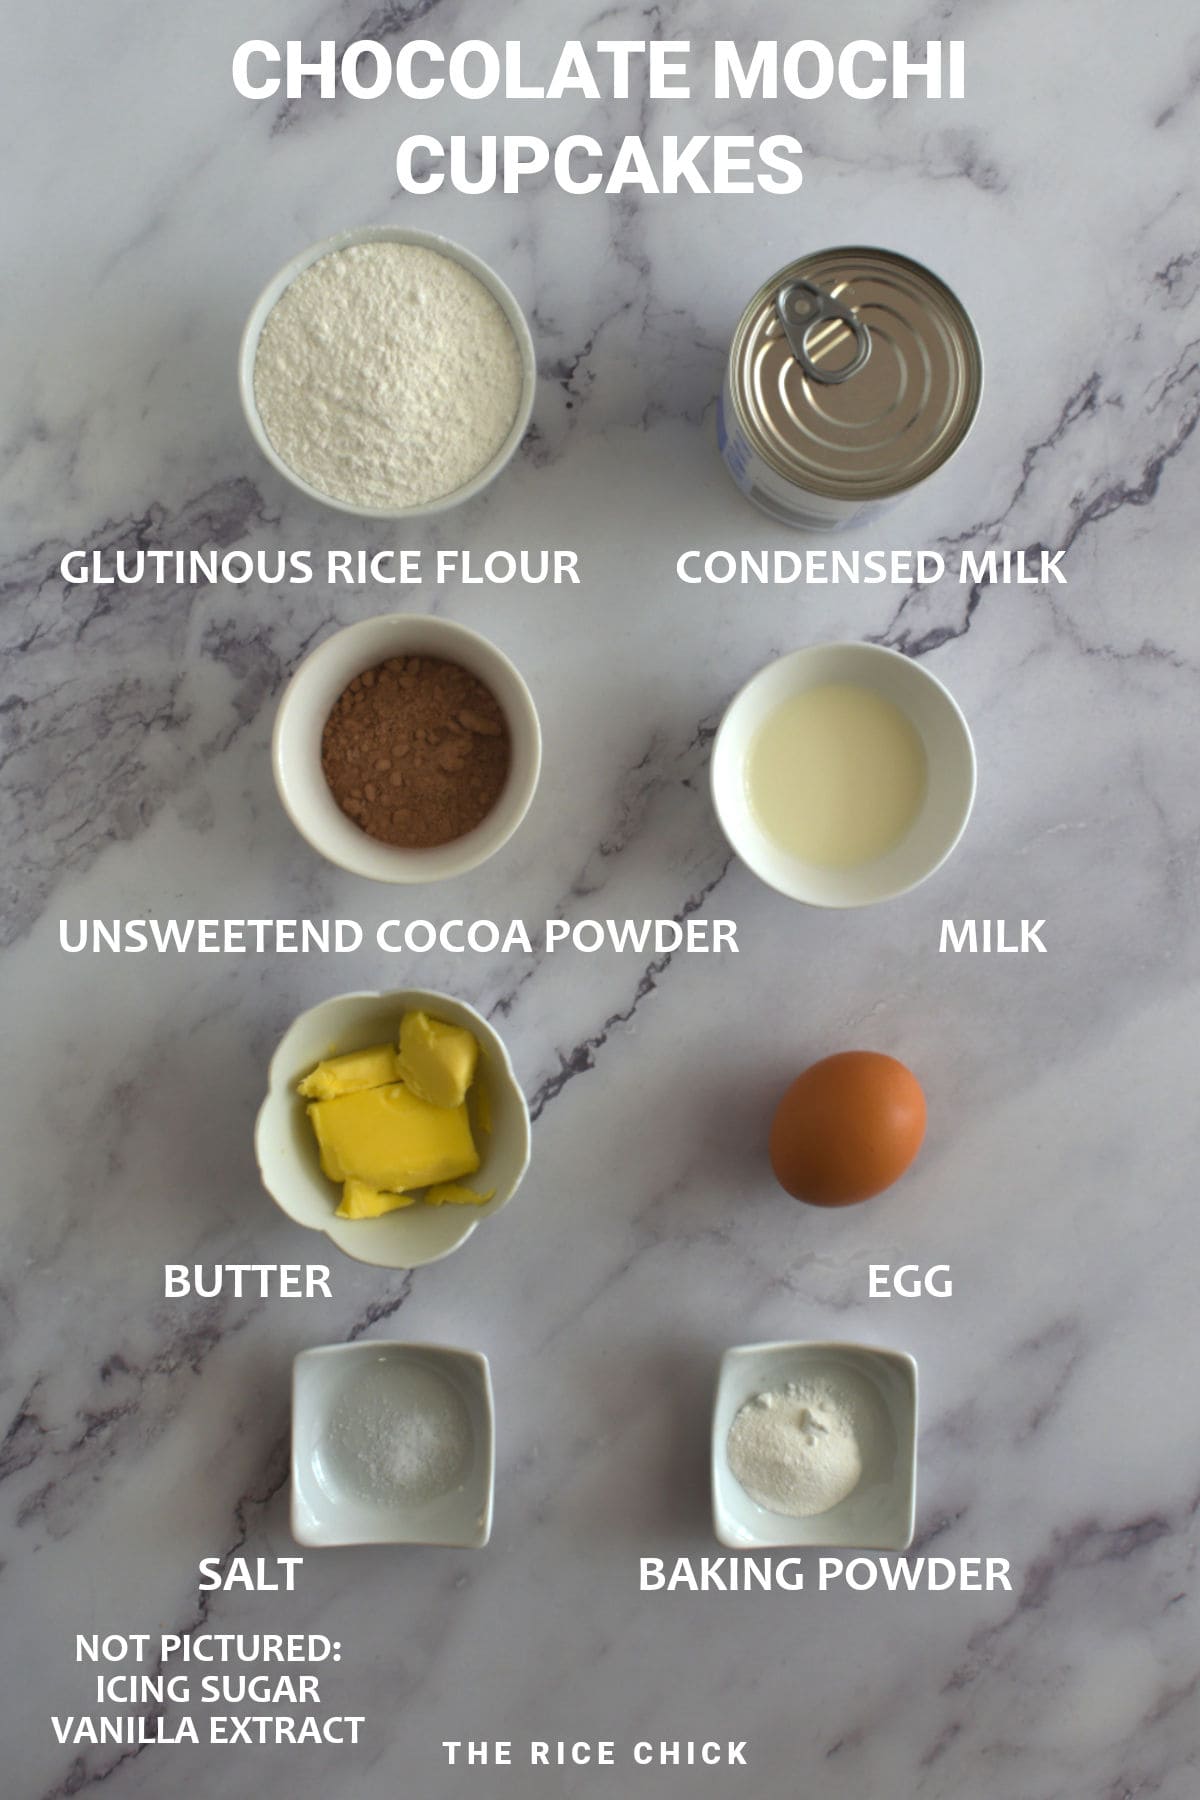 Ingredients for chocolate mochi cupcakes.